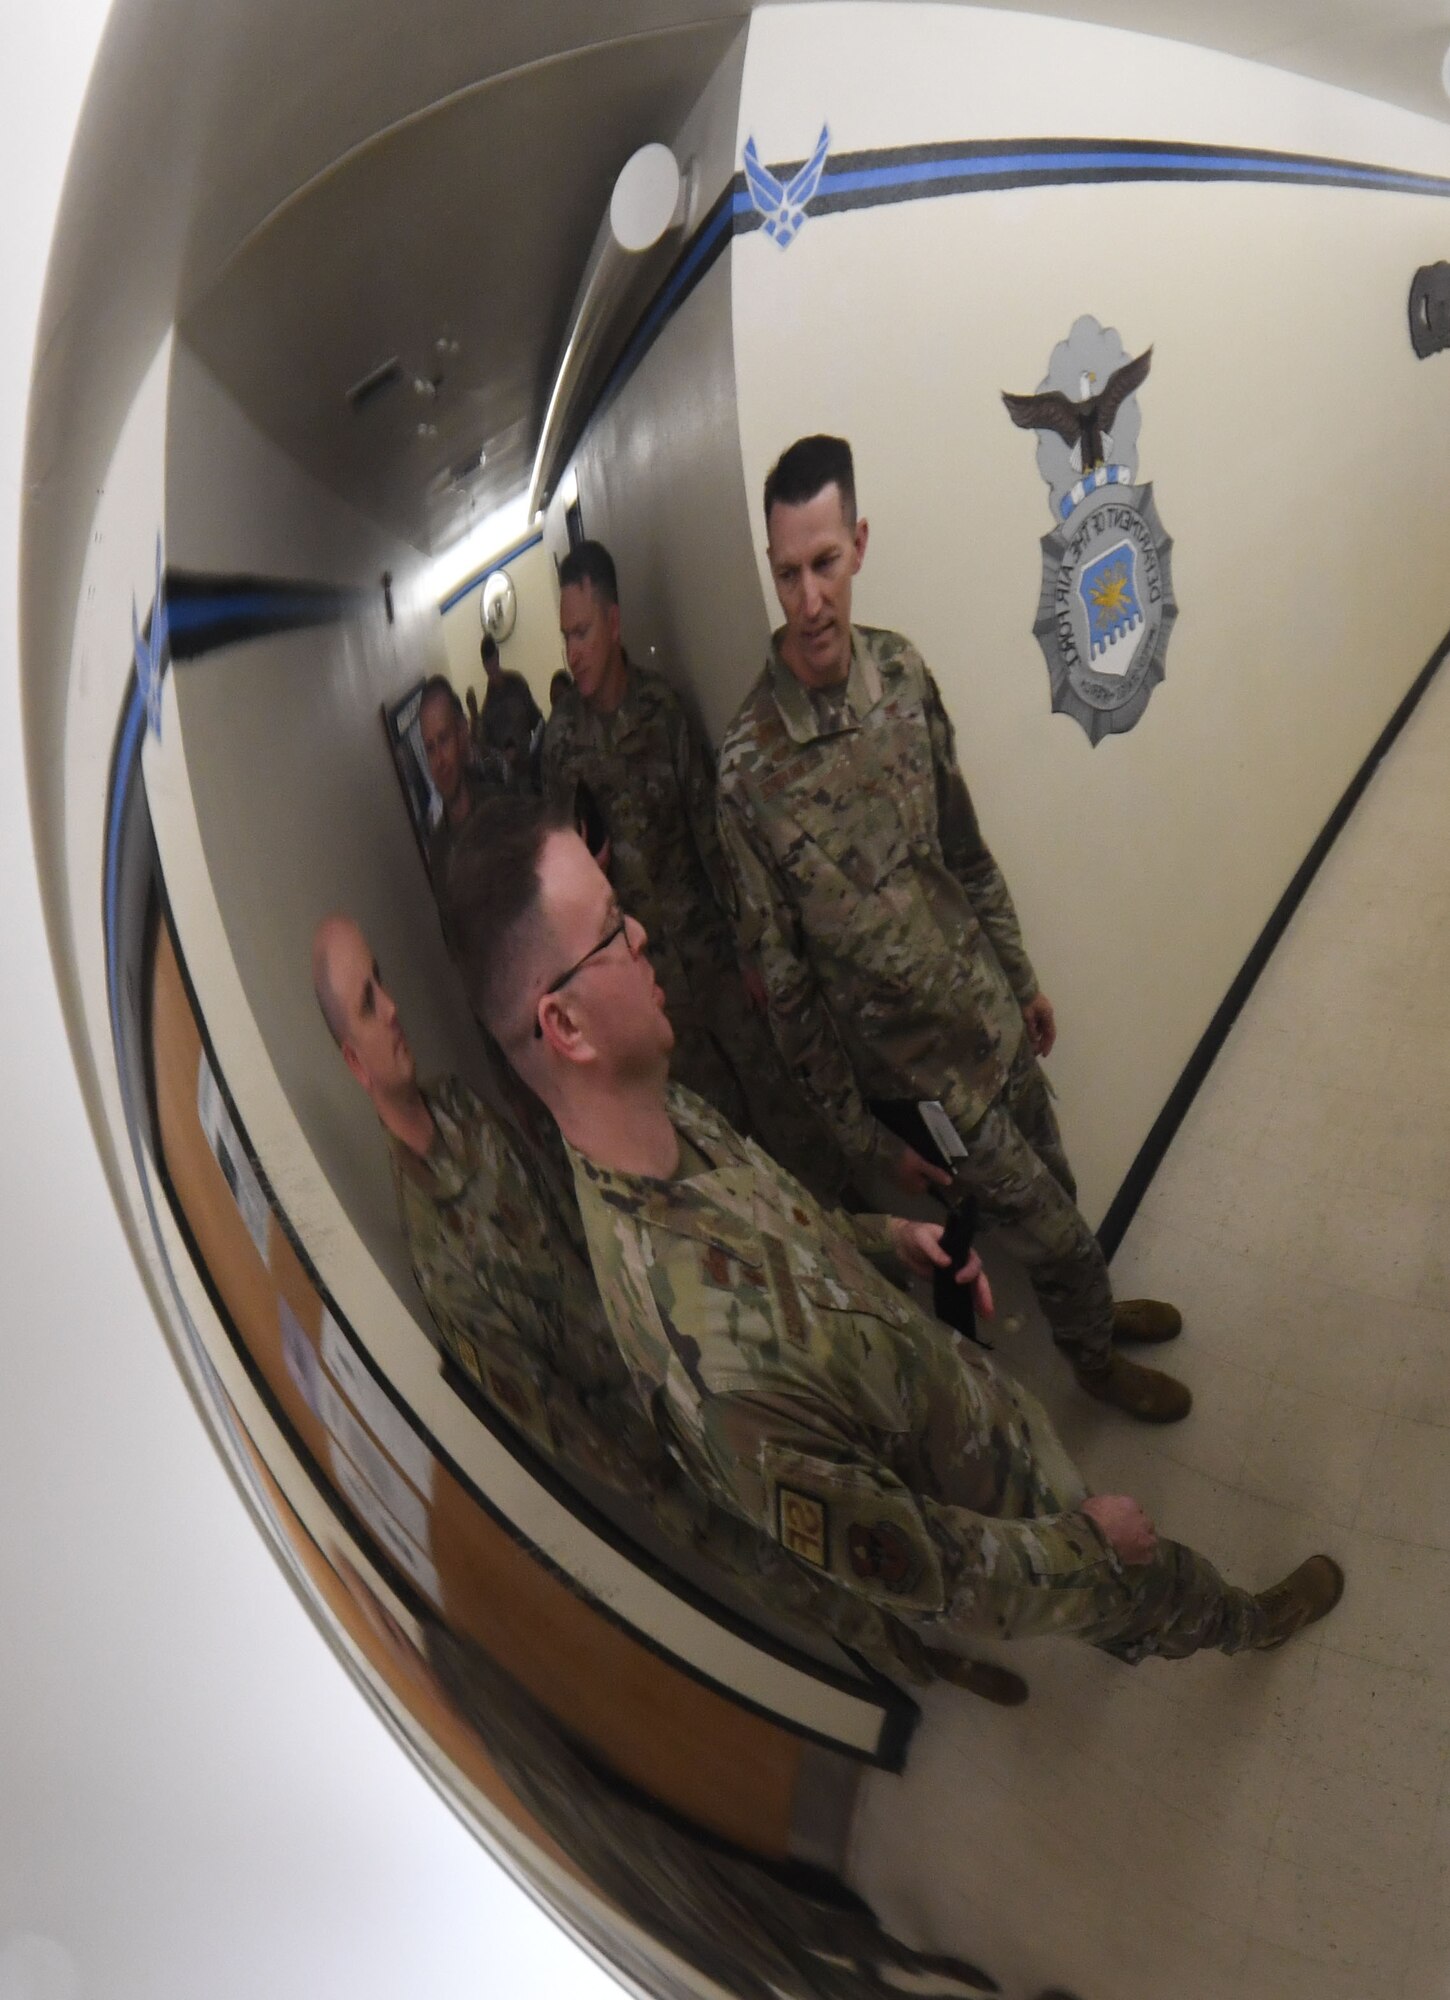 U.S. Air Force Maj. Shaun O'Dell, 81st Security Forces Squadron commander, escorts Col. Billy Pope, 81st Training Wing commander, through the 81st SFS building for an overview of the squadron's mission and capabilities during the 81st Mission Support Group Immersion Tour at Keesler Air Force Base, Mississippi, April 7, 2023.